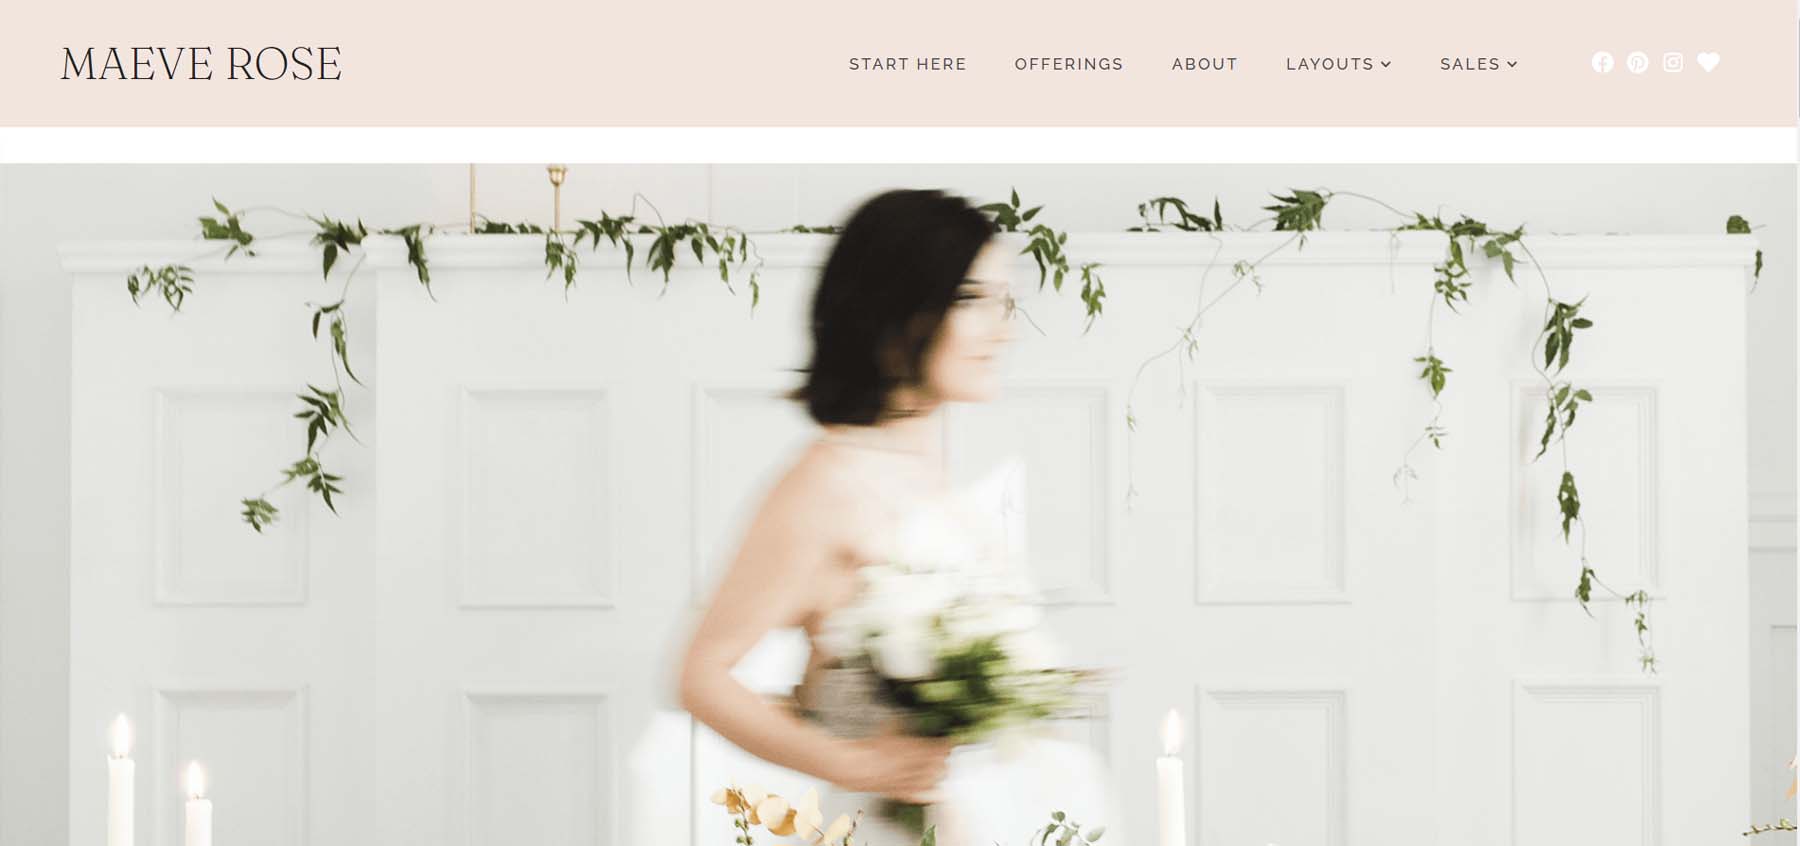 Maeve, one of the best WordPress Wedding Themes for Wedding Professionals